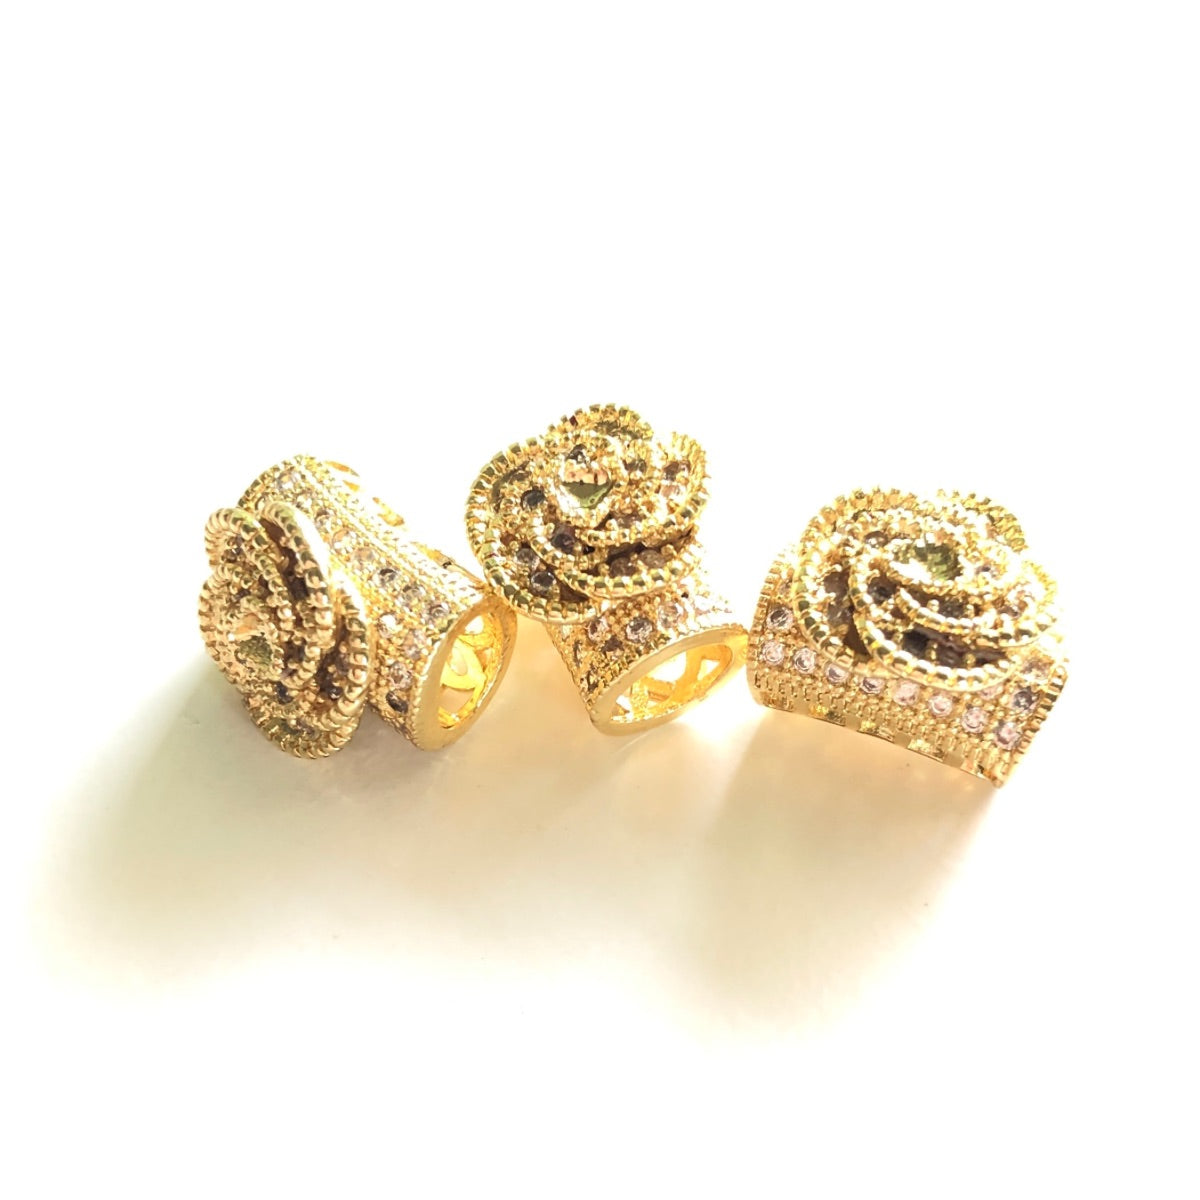 10pcs/lot 14*11mm CZ Paved Flower Tube Spacers Gold CZ Paved Spacers Flower Spacers Tube Bar Centerpieces Charms Beads Beyond